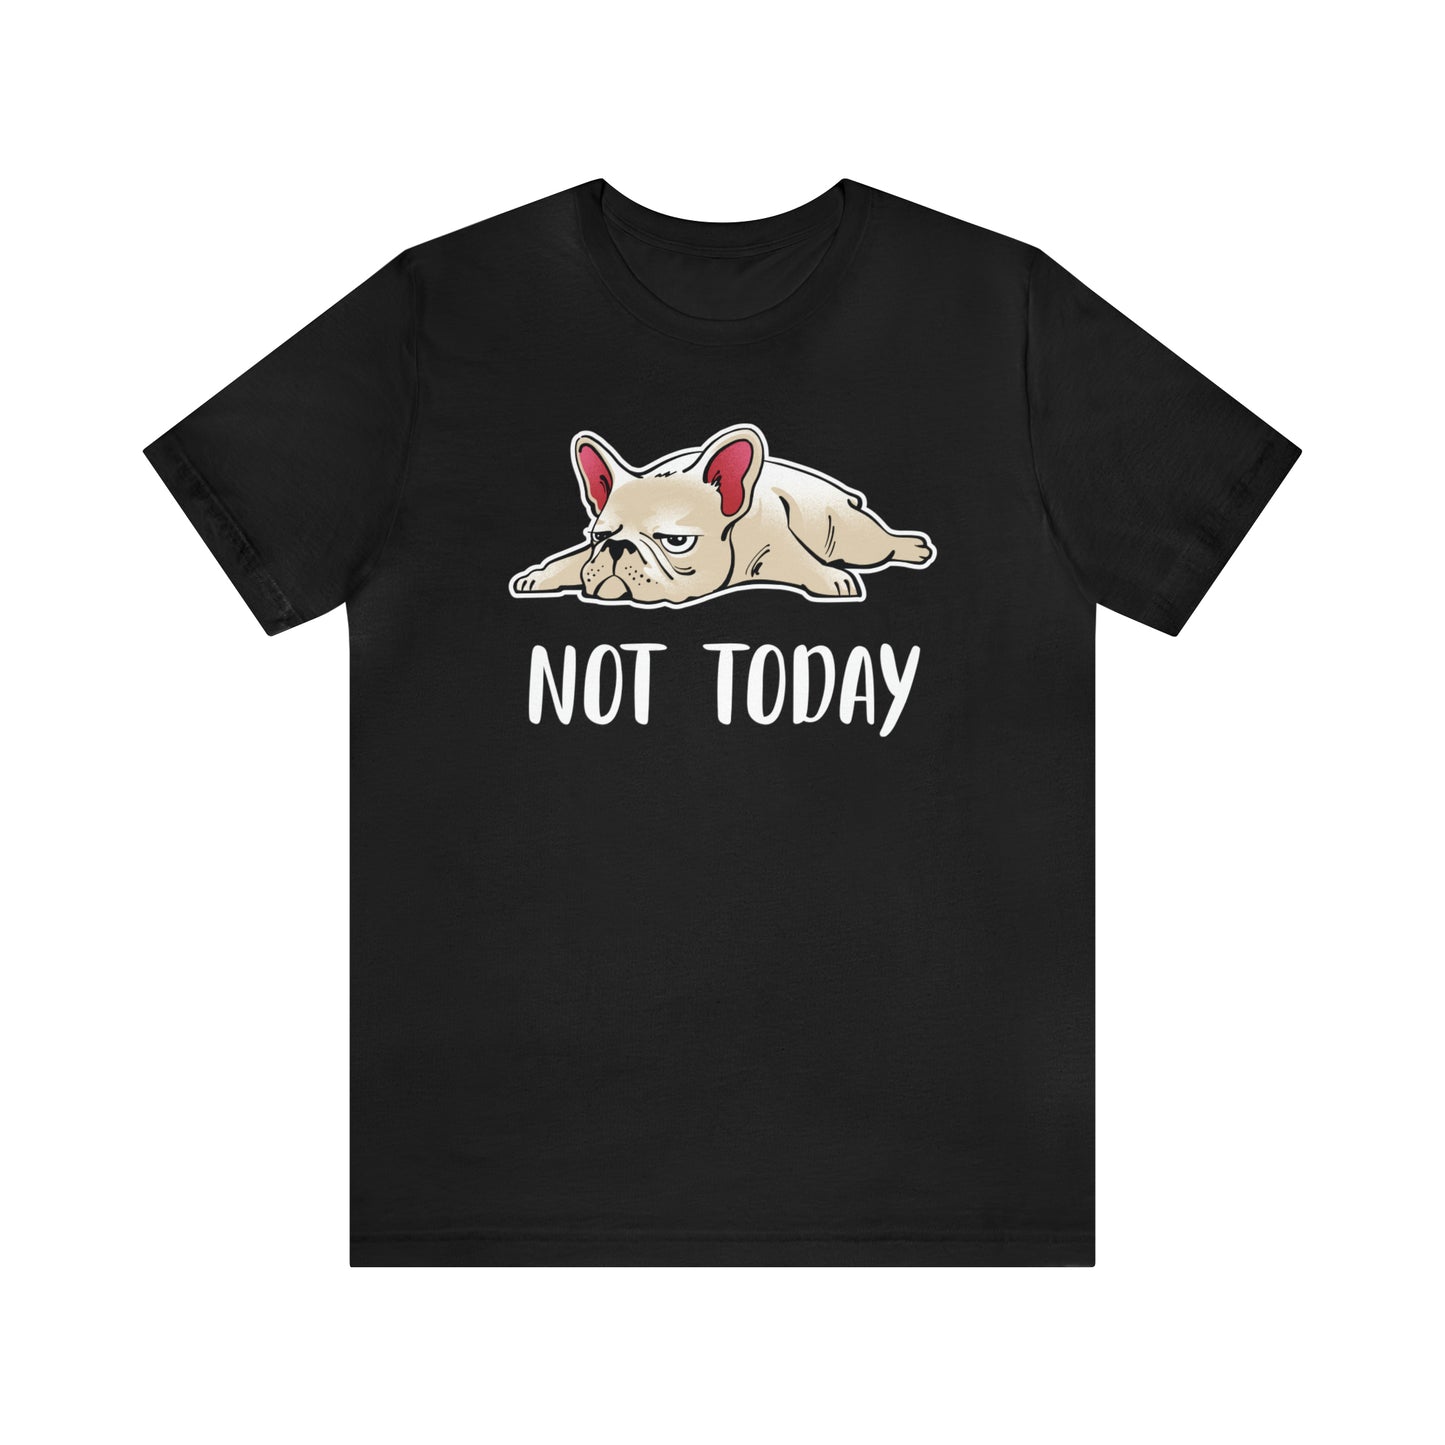 Not Today Graphic Tee